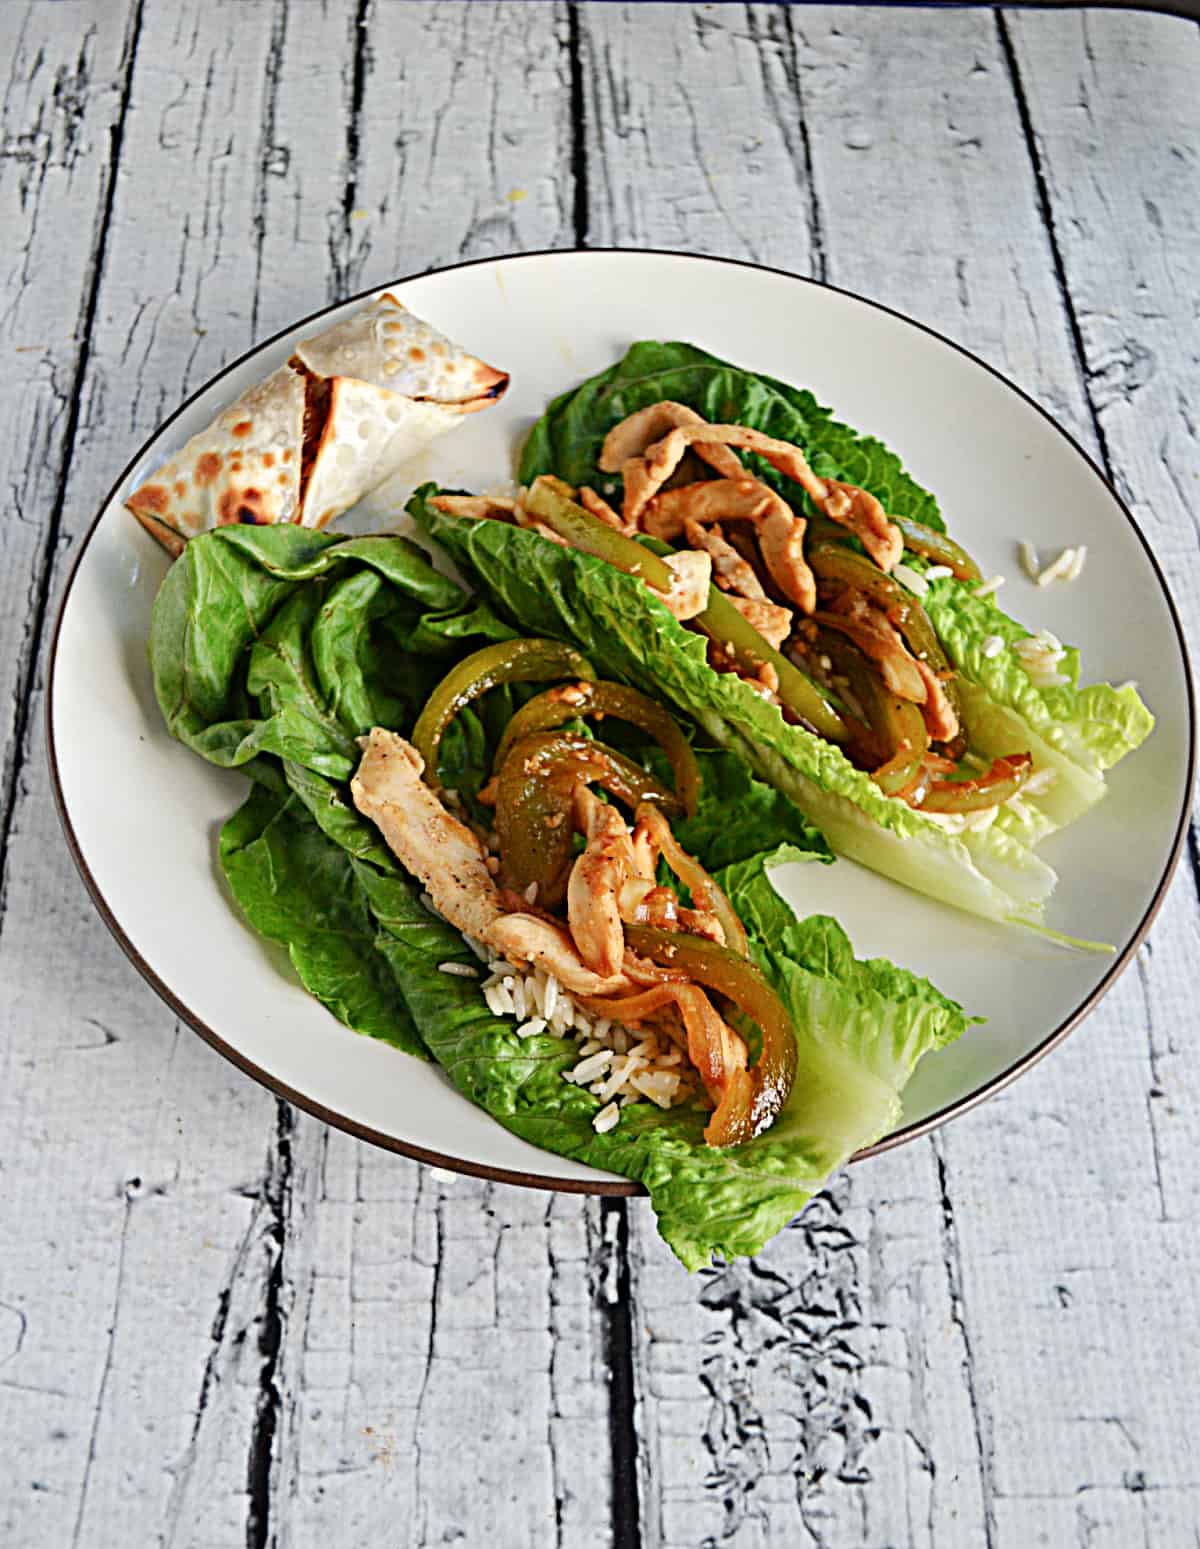 A plate with two lettuce wraps filled with chicken , peppers, and onions with an egg roll on the plate.